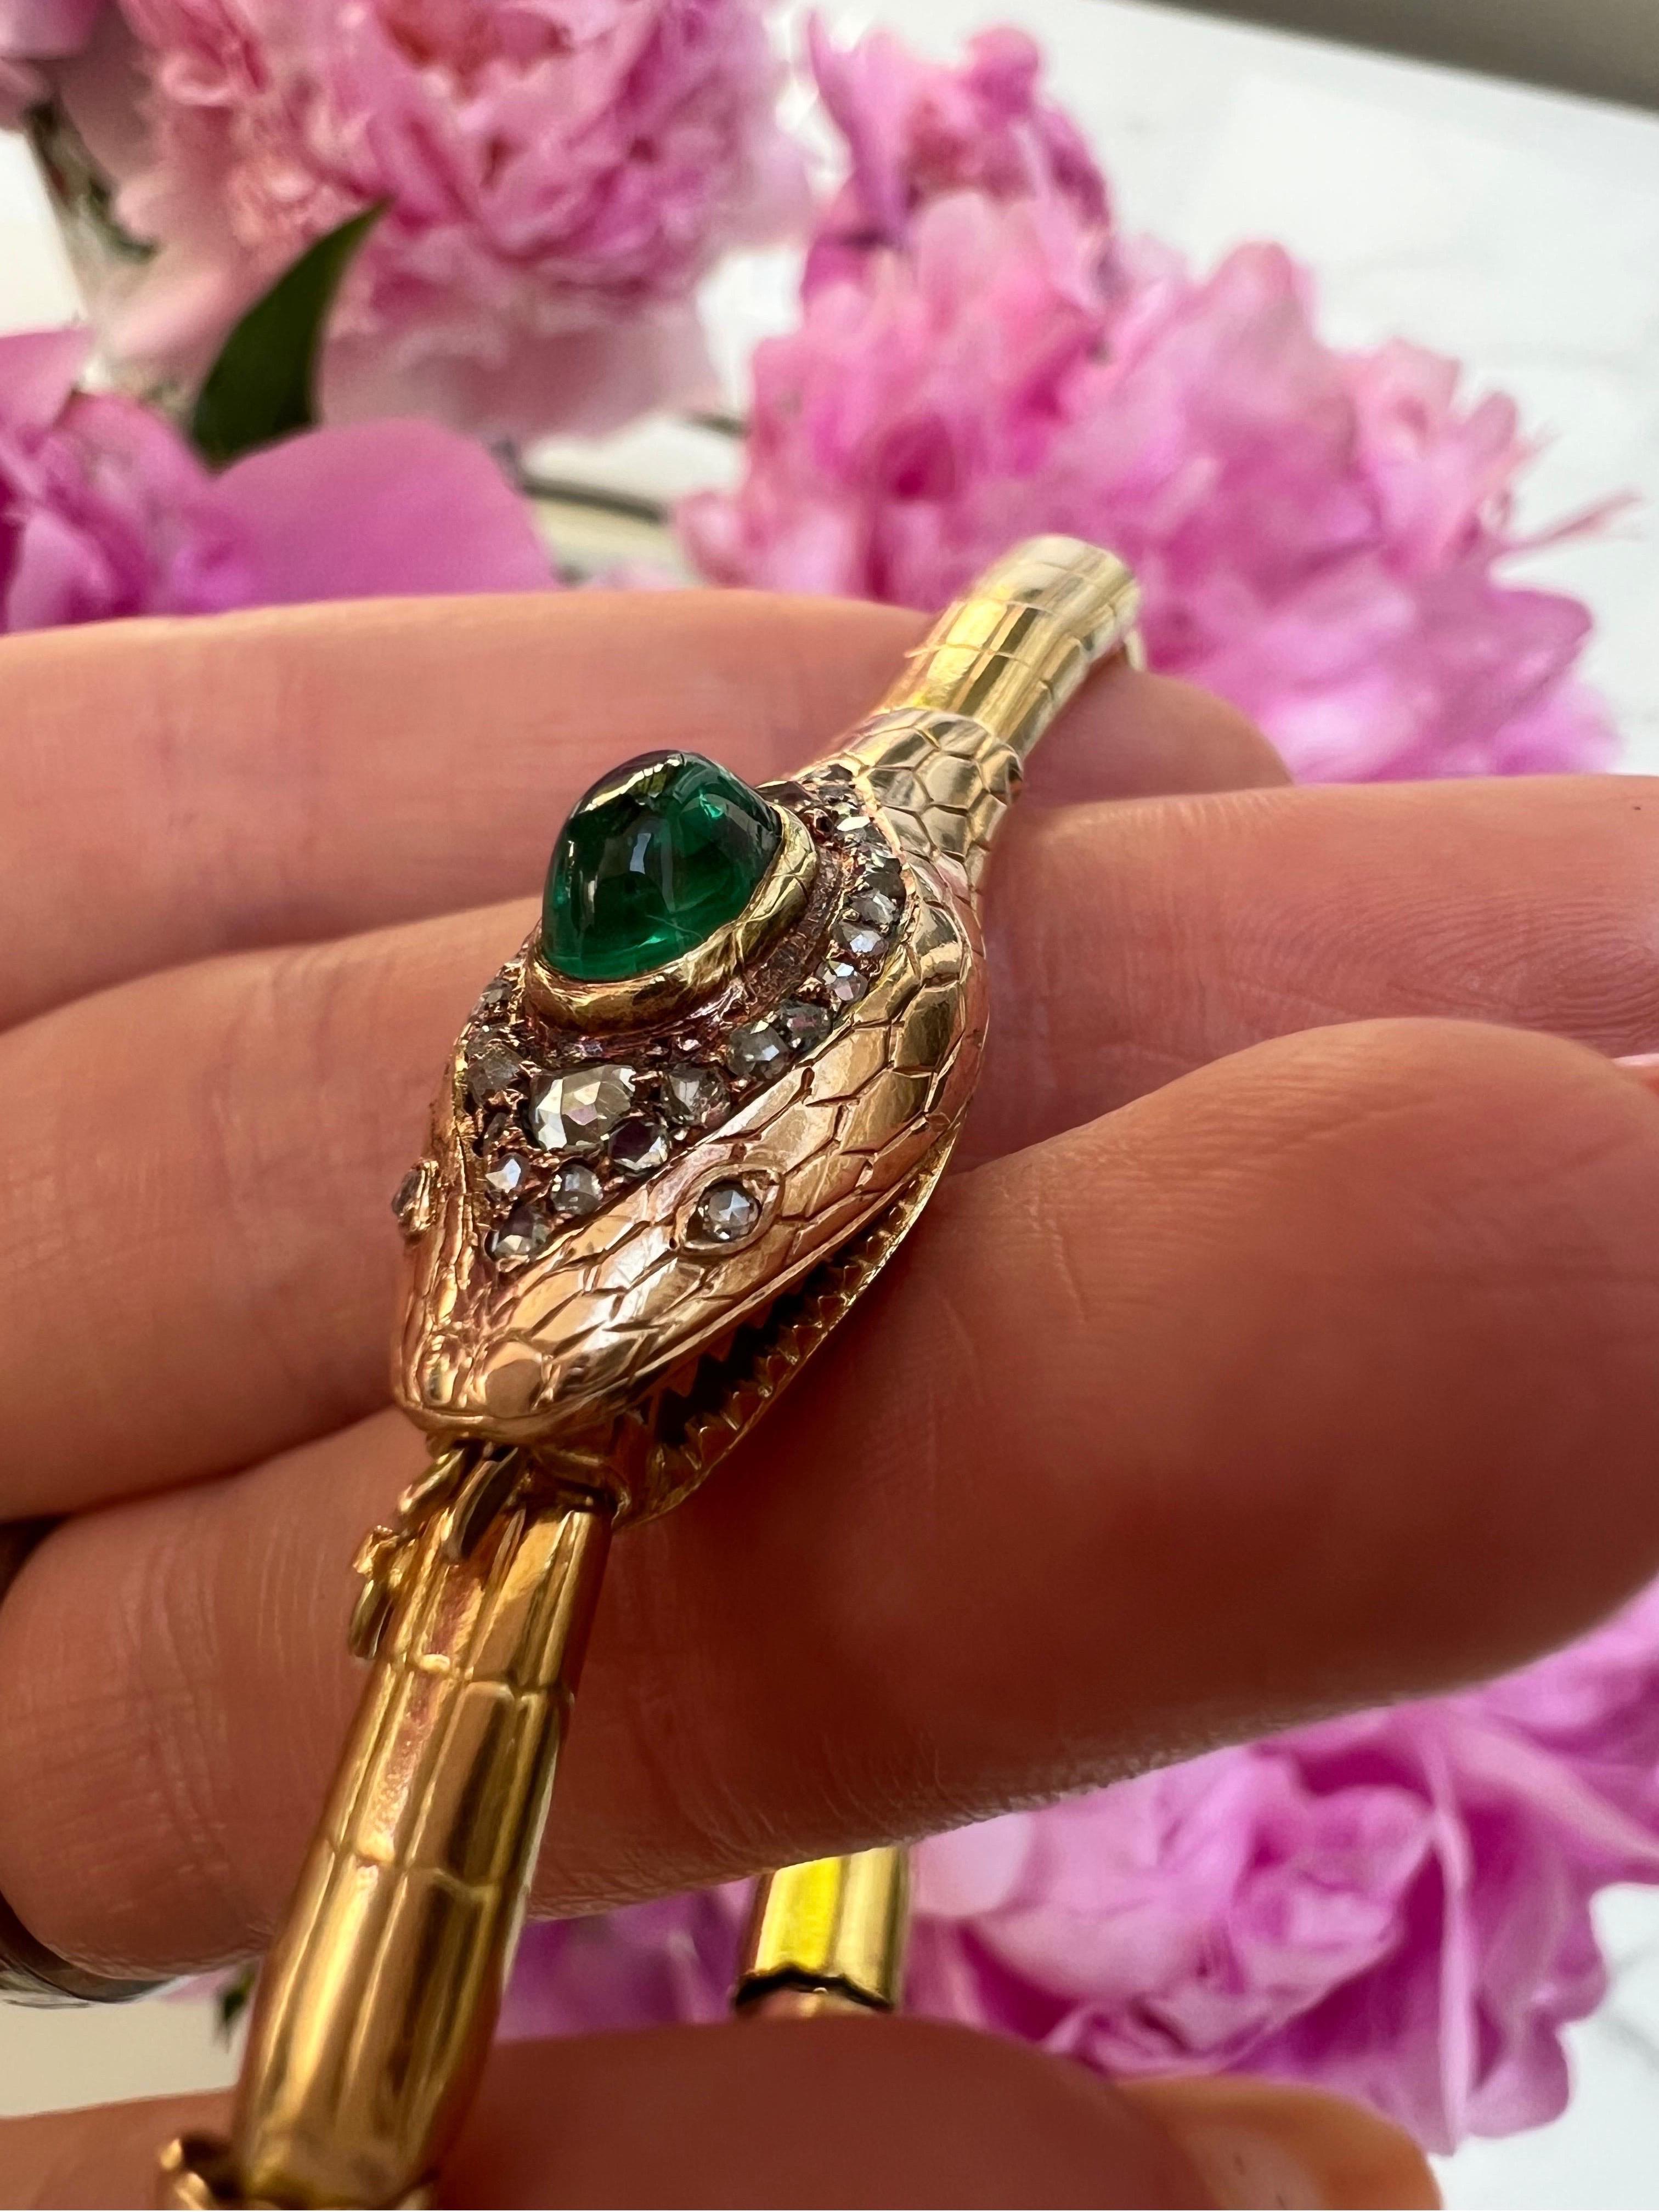 Antique Victorian (c1900) Cabochon Emerald and Diamond Snake Bracelet. In excellent condition. Oval cabochon emerald is Approx 1.5cts surrounded by rose cut diamonds, all set in 18ct gold, measures 8.5’’. 